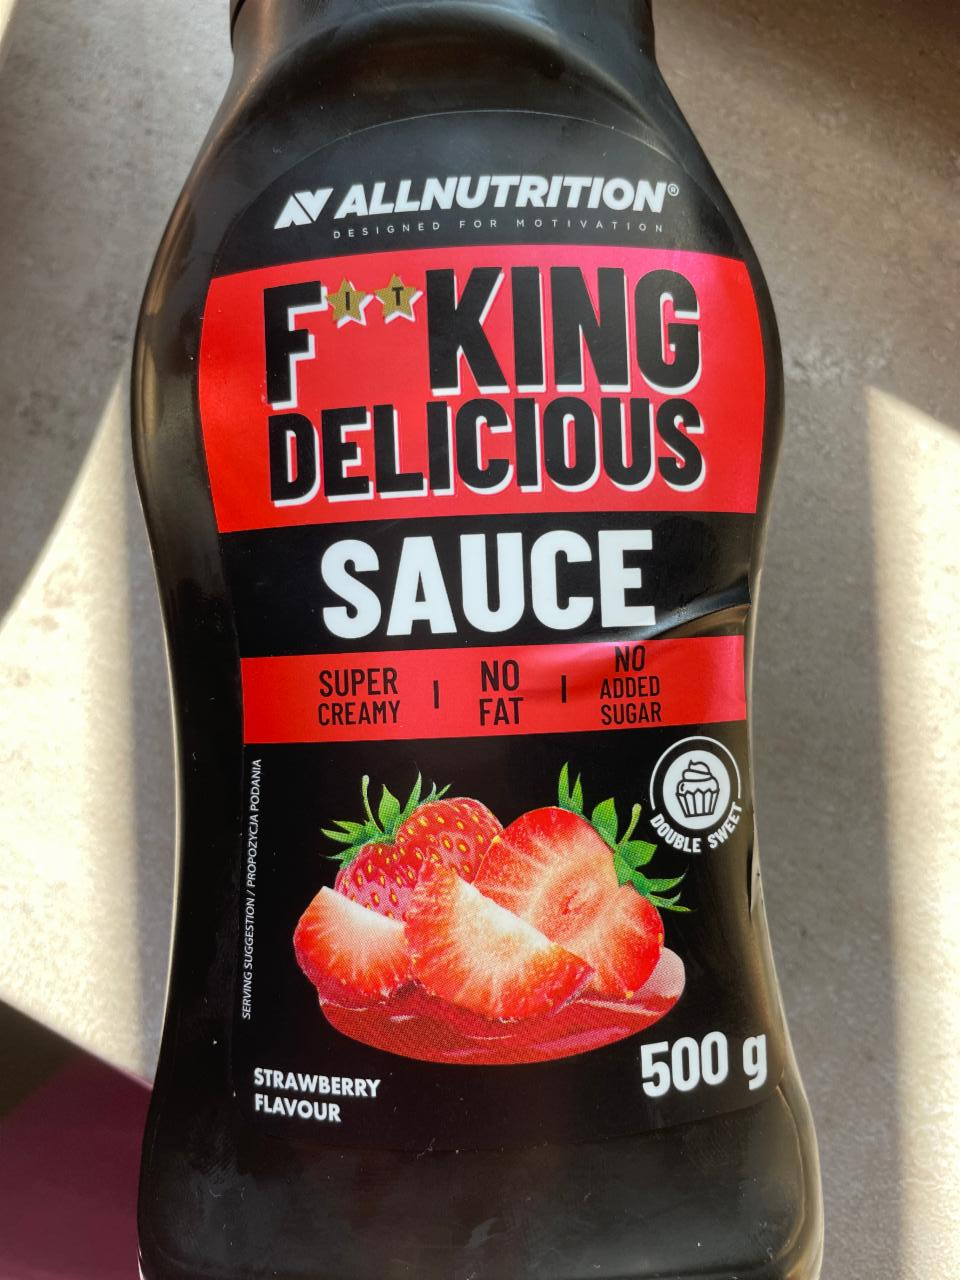 Fotografie - Fitking Delicious Sauce Strawberry flavour Allnutrition